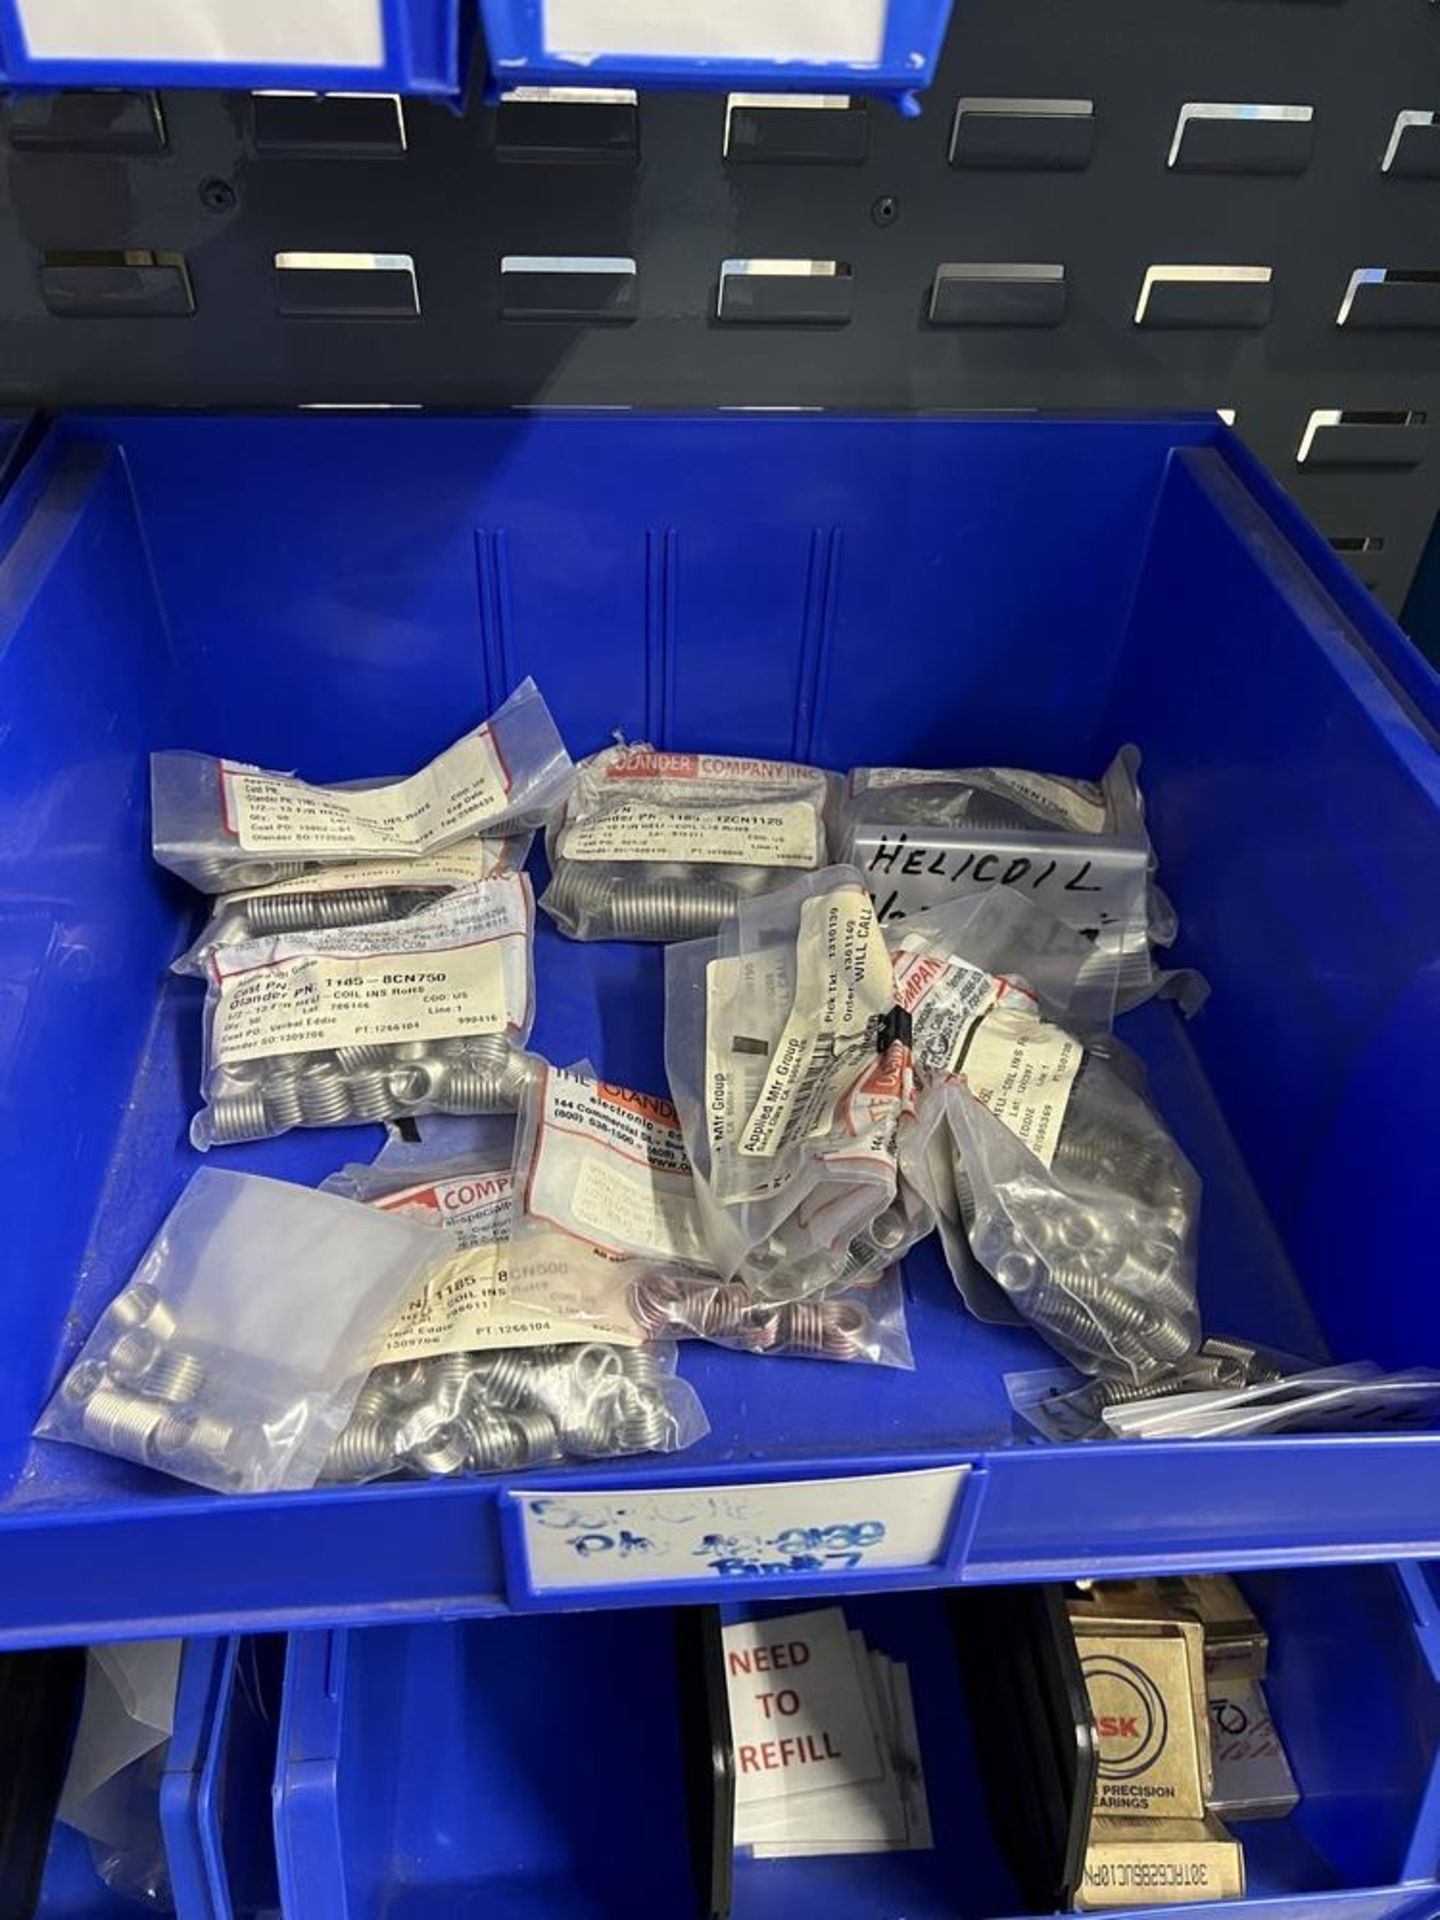 Large Bin Organizer Full of Various Size Helicoils, Dowel Pins, Heicoil Installation Tools, - Image 11 of 13